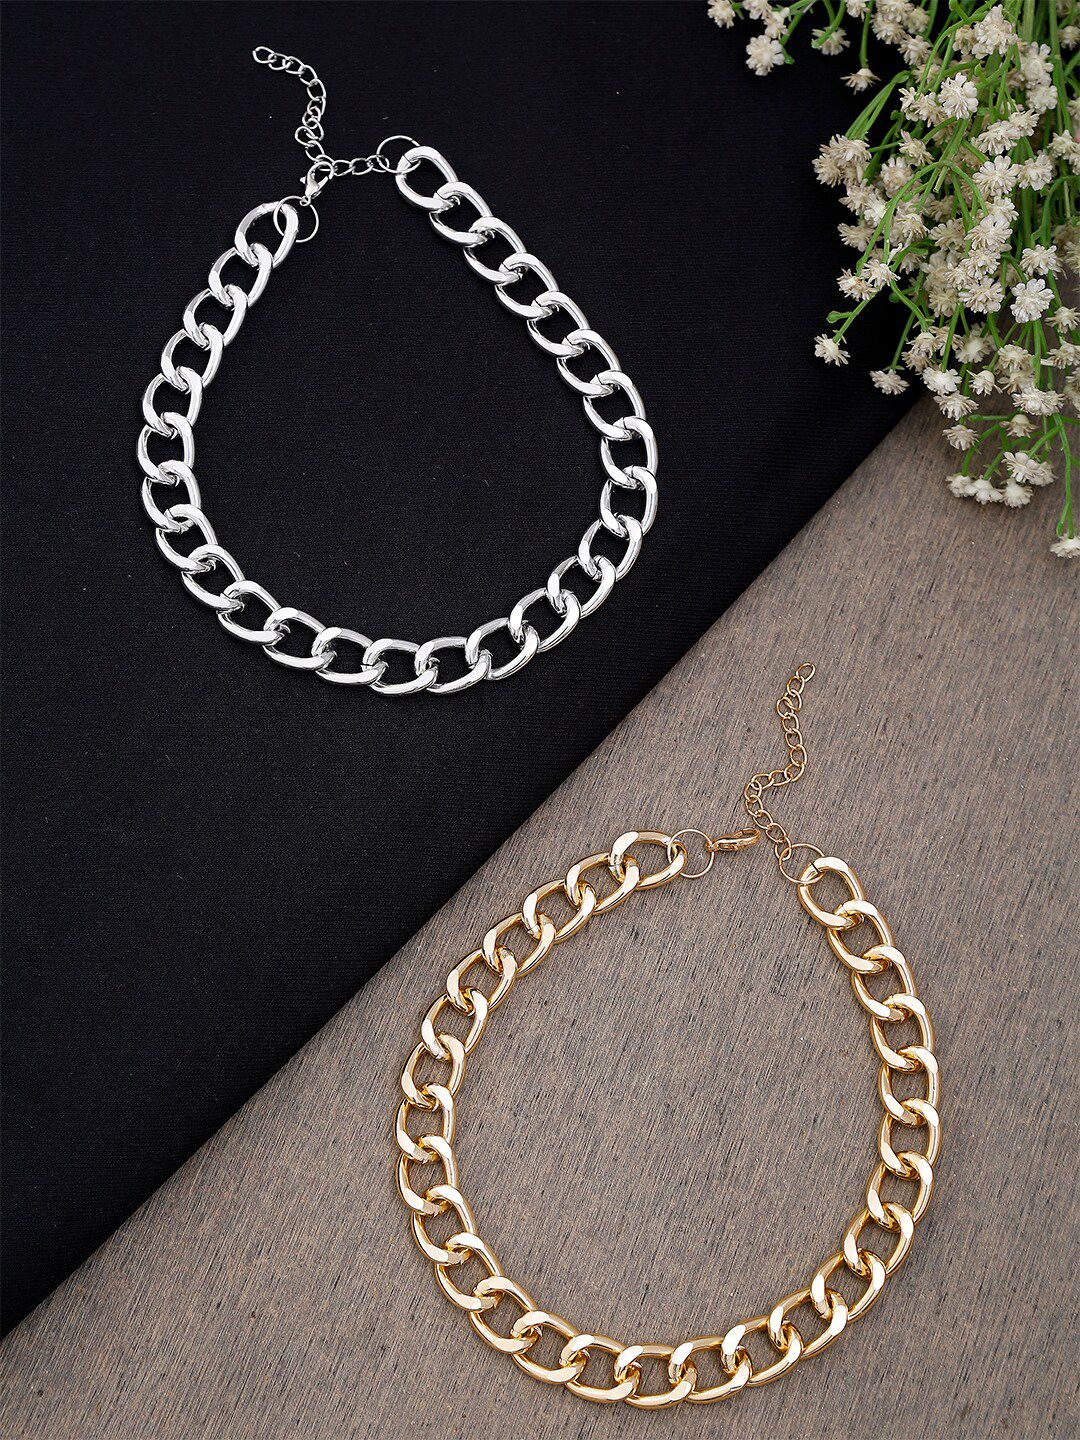 YouBella Pack of 2 Linked Chain Necklace Price in India